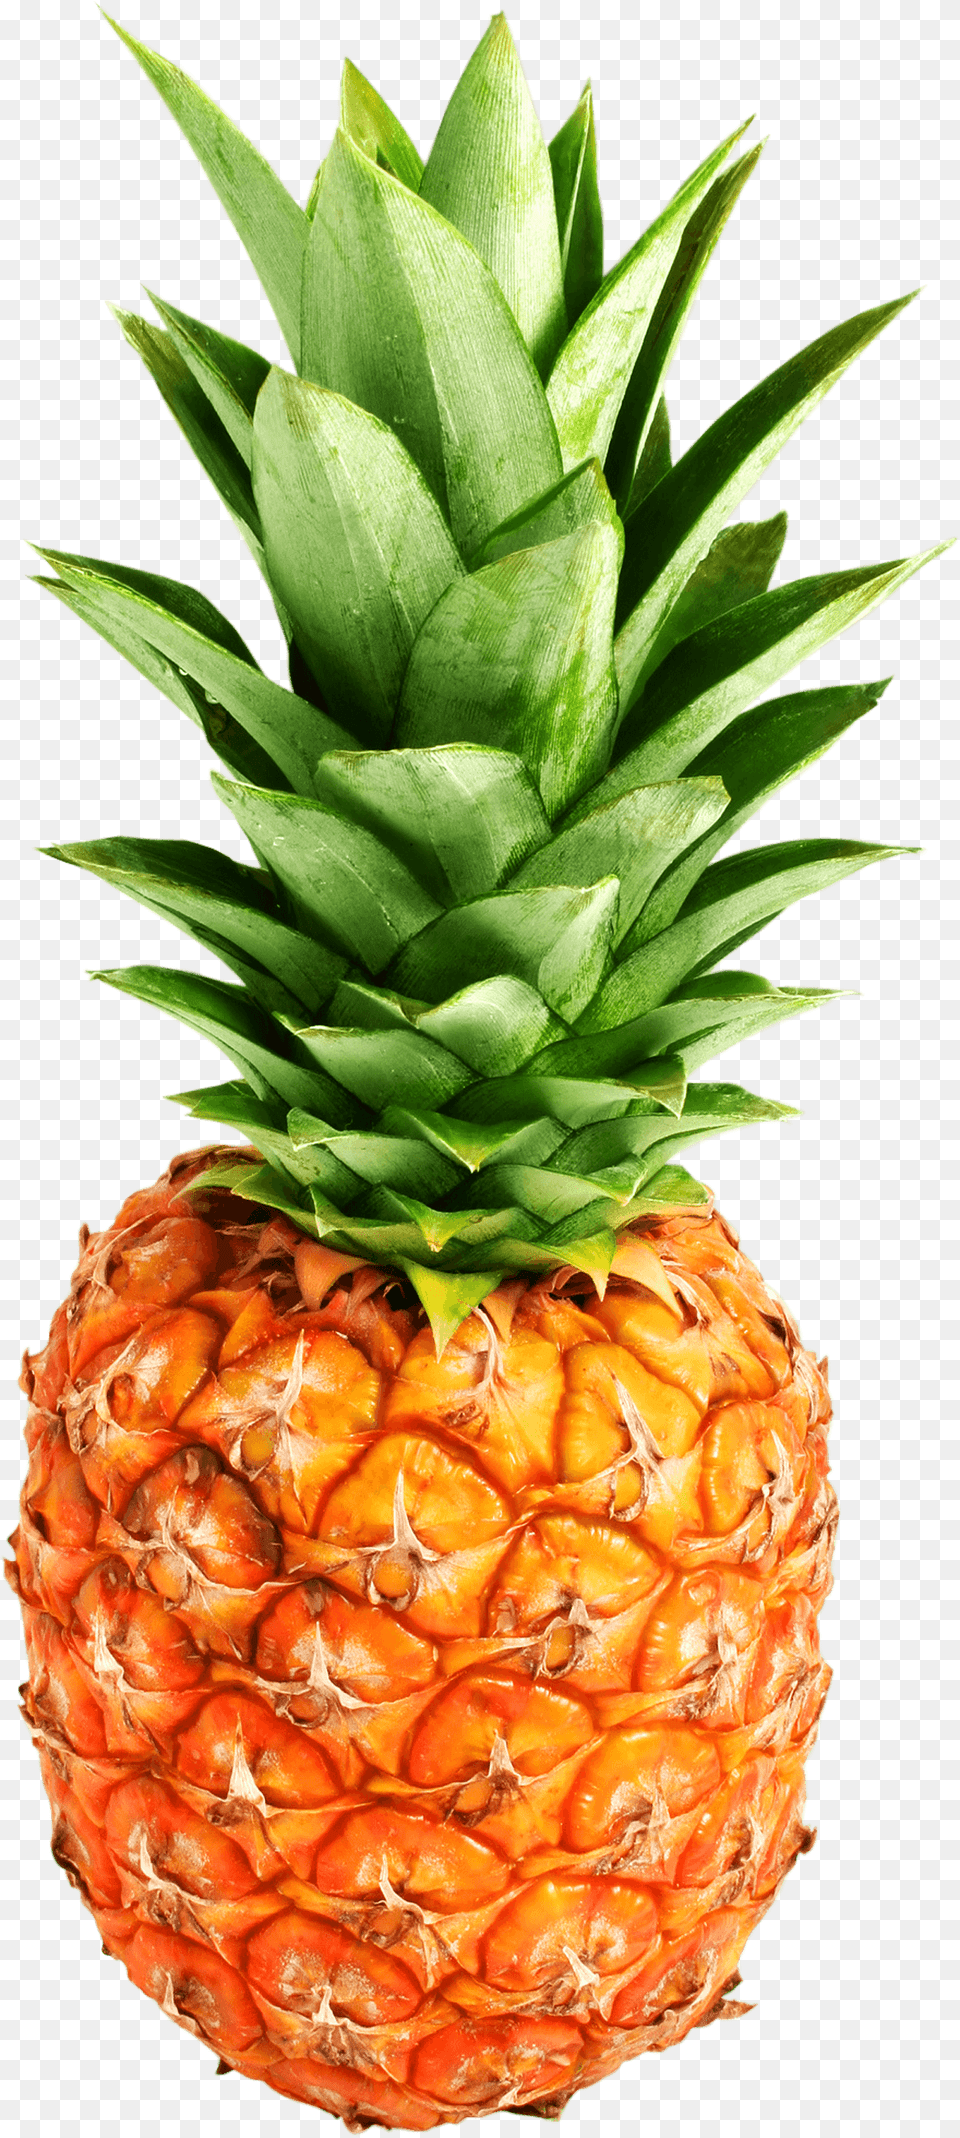 Pineapple Transparent Photo Pineapple, Food, Fruit, Plant, Produce Png Image